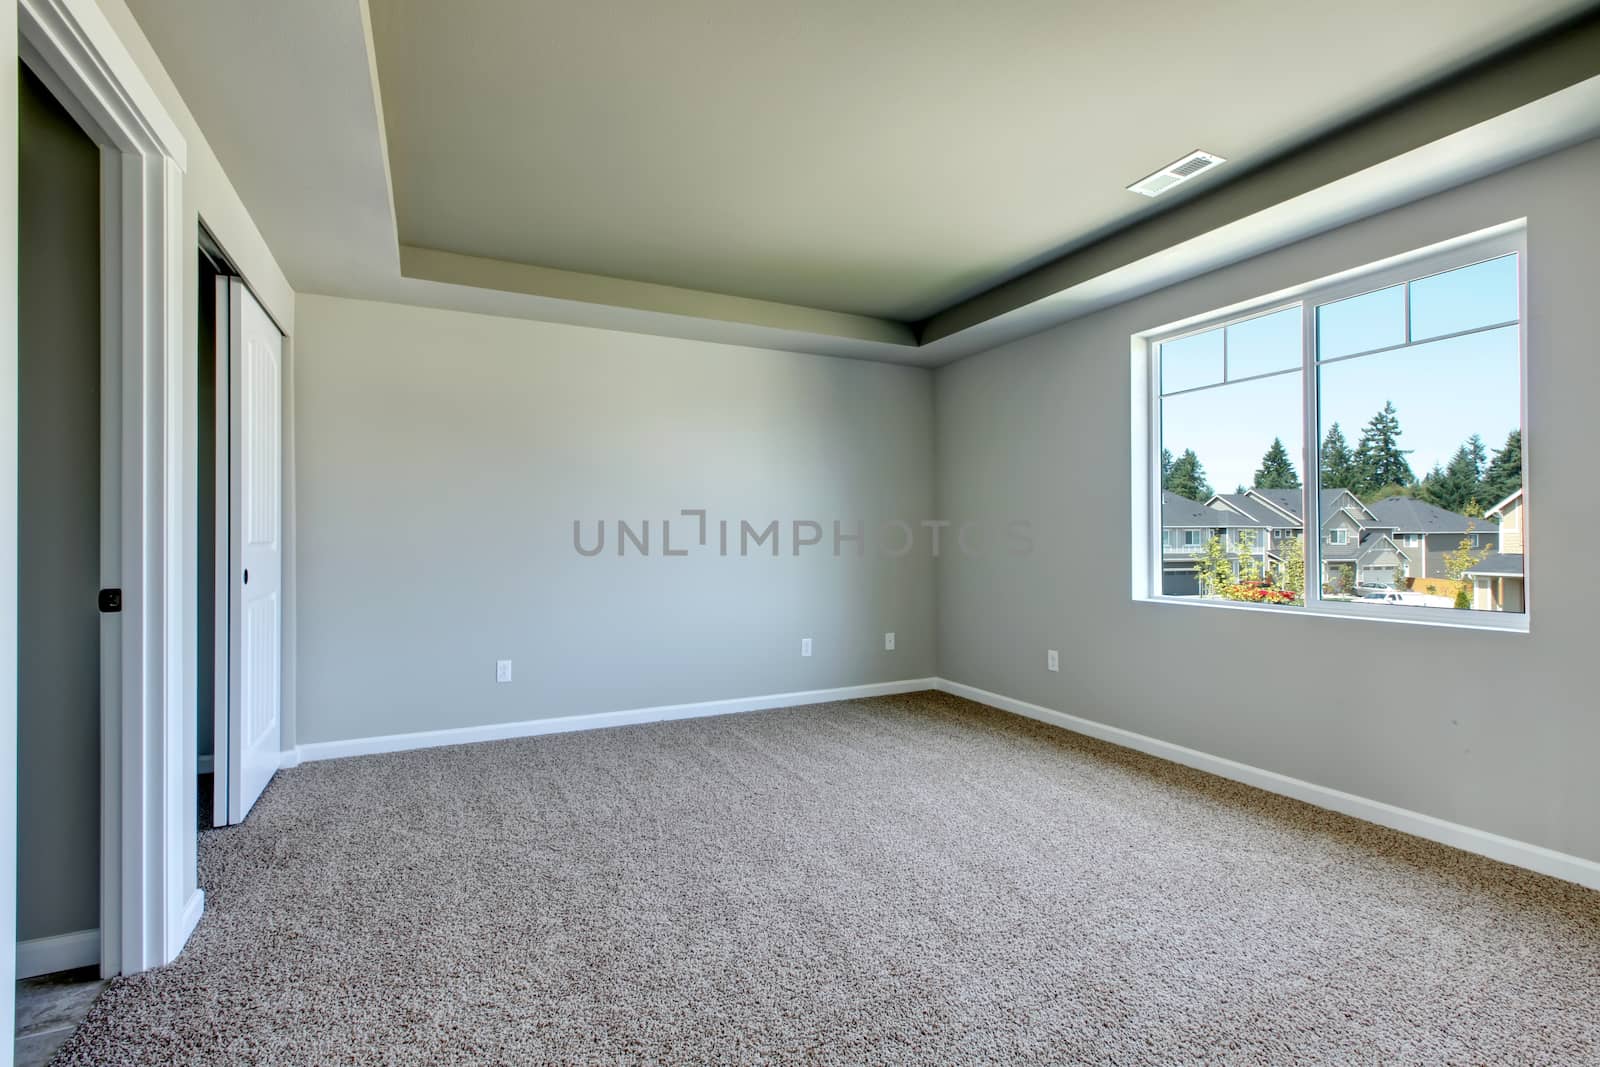 New empty room with beige carpet.. New house development in USA.